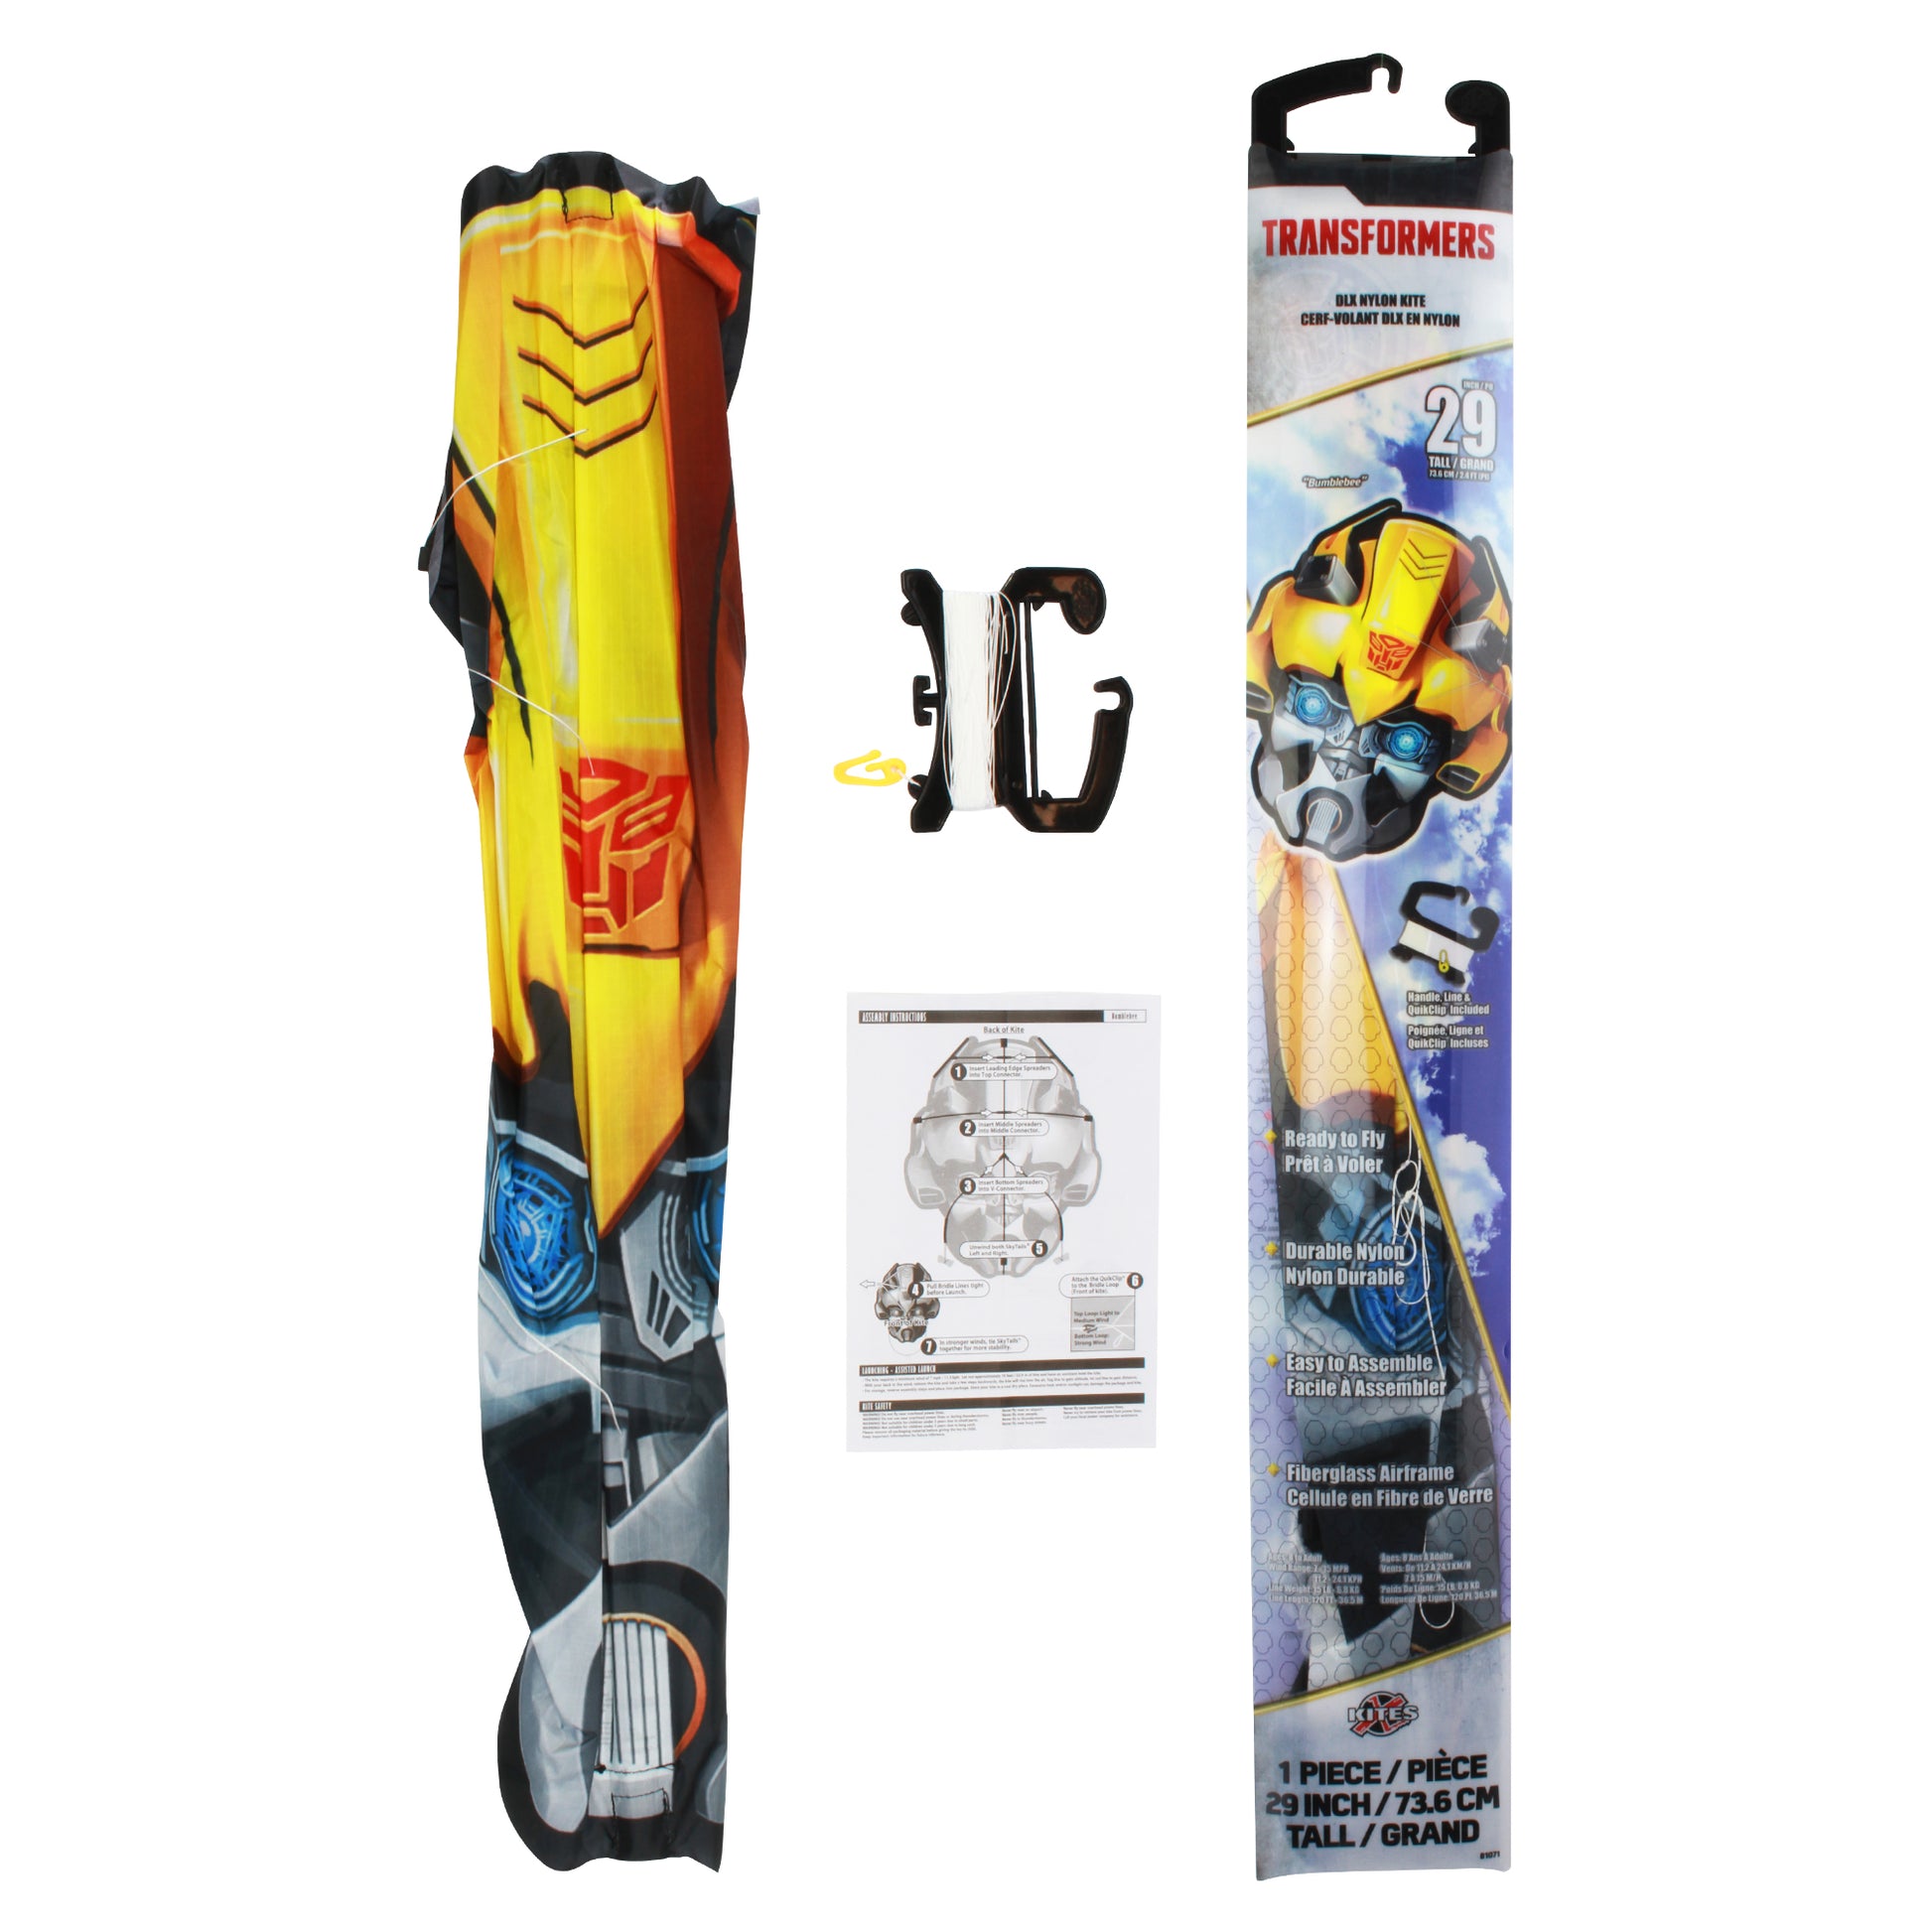 X Kites Face Kite Transformers Bumblebee DLX Nylon Kite packaging and contents